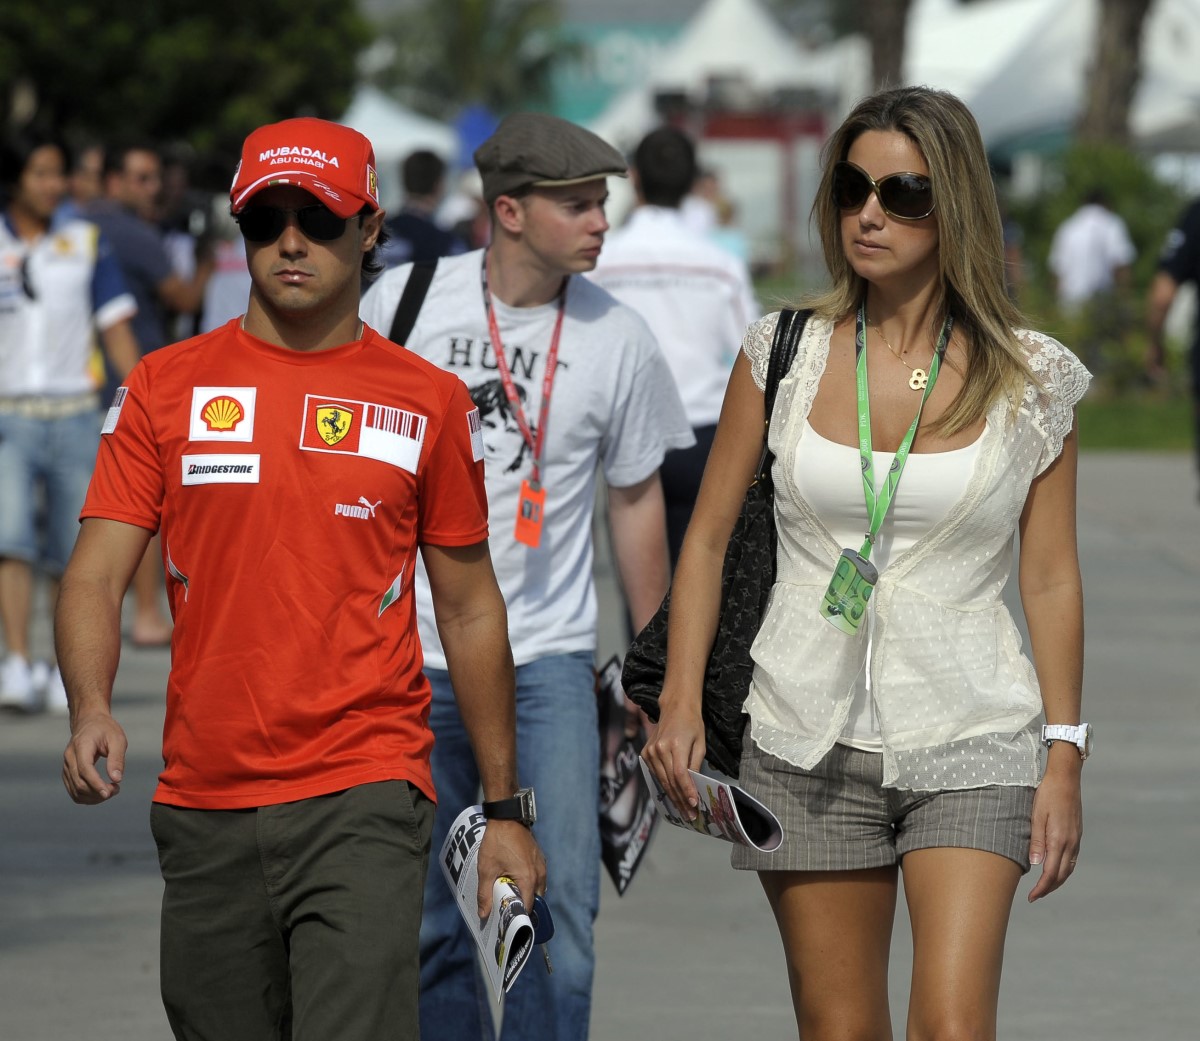 Felipe Massa and his girlfriend at the time at the 2008 Malaysian GP